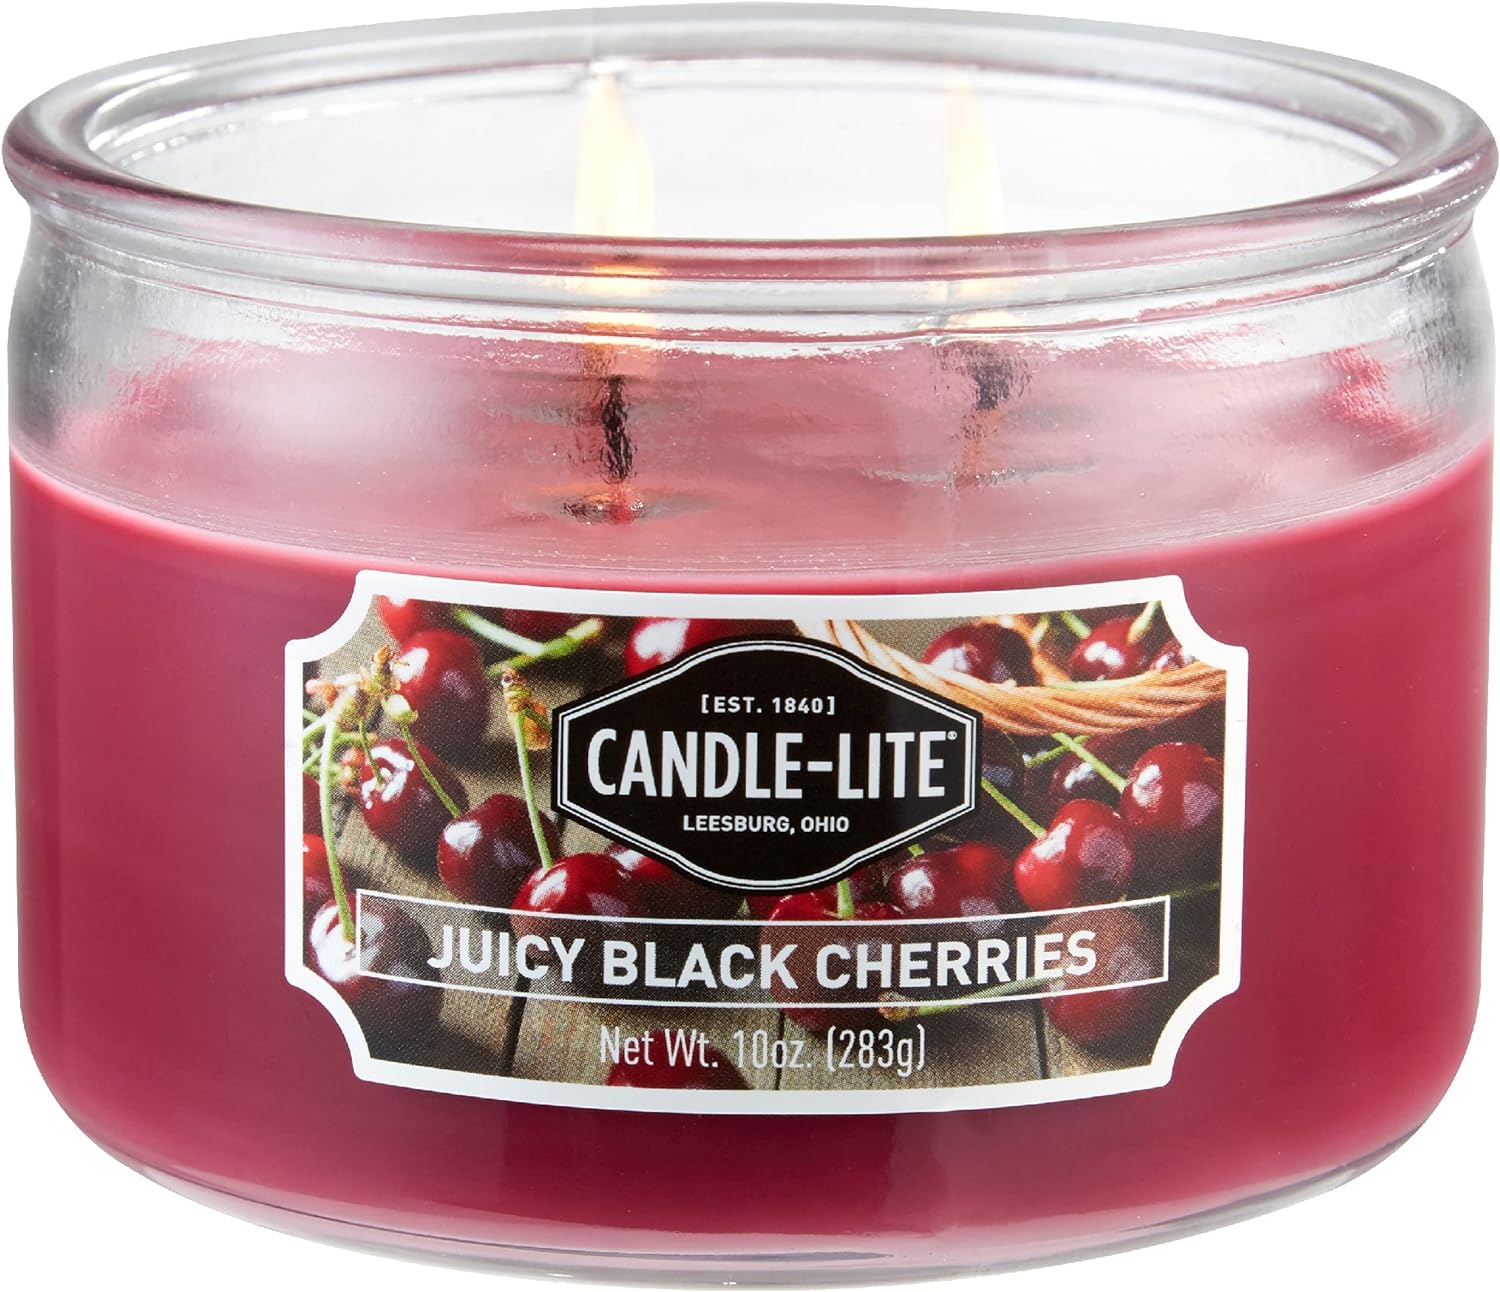 10-Oz. Candle-lite Scented 3-Wick Aromatherapy Candle (Juicy Black Cherries or Fresh Lavender Breeze) $3.80 w/ S&S + Free Shipping w/ Prime or on $35+